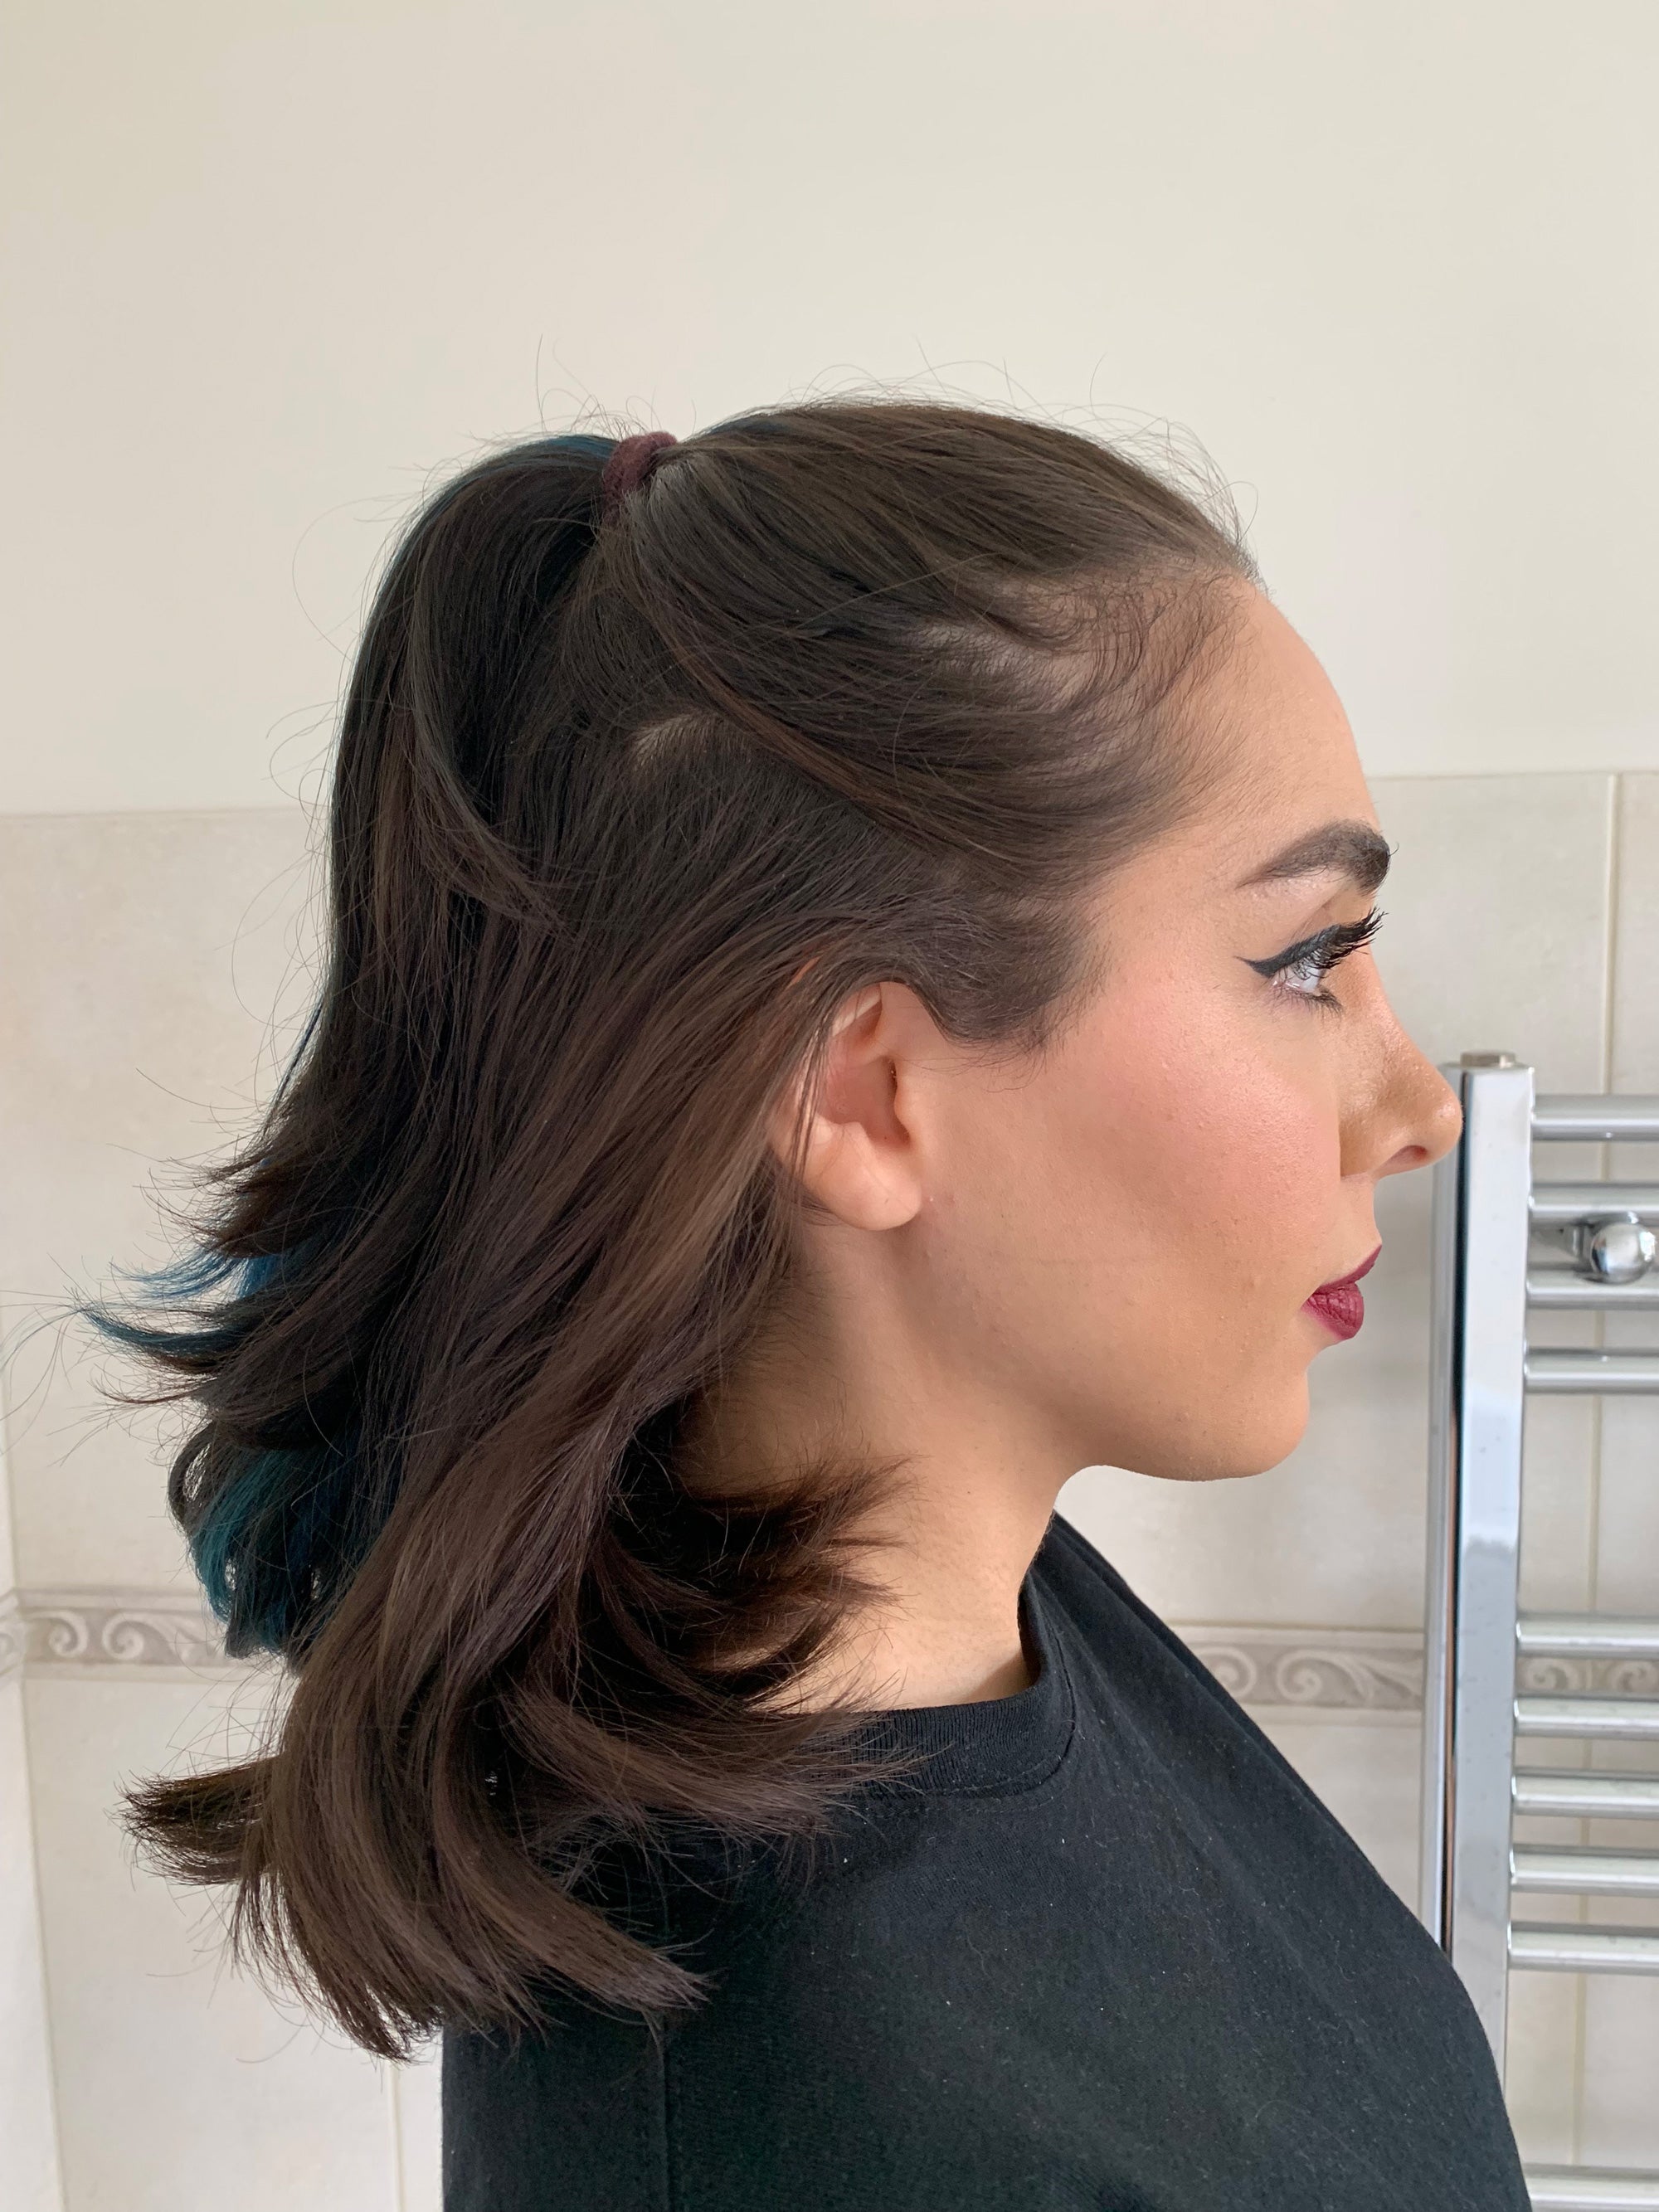 15 Types Of Ponytails Every Woman Should Know About  Bewakoof Blog